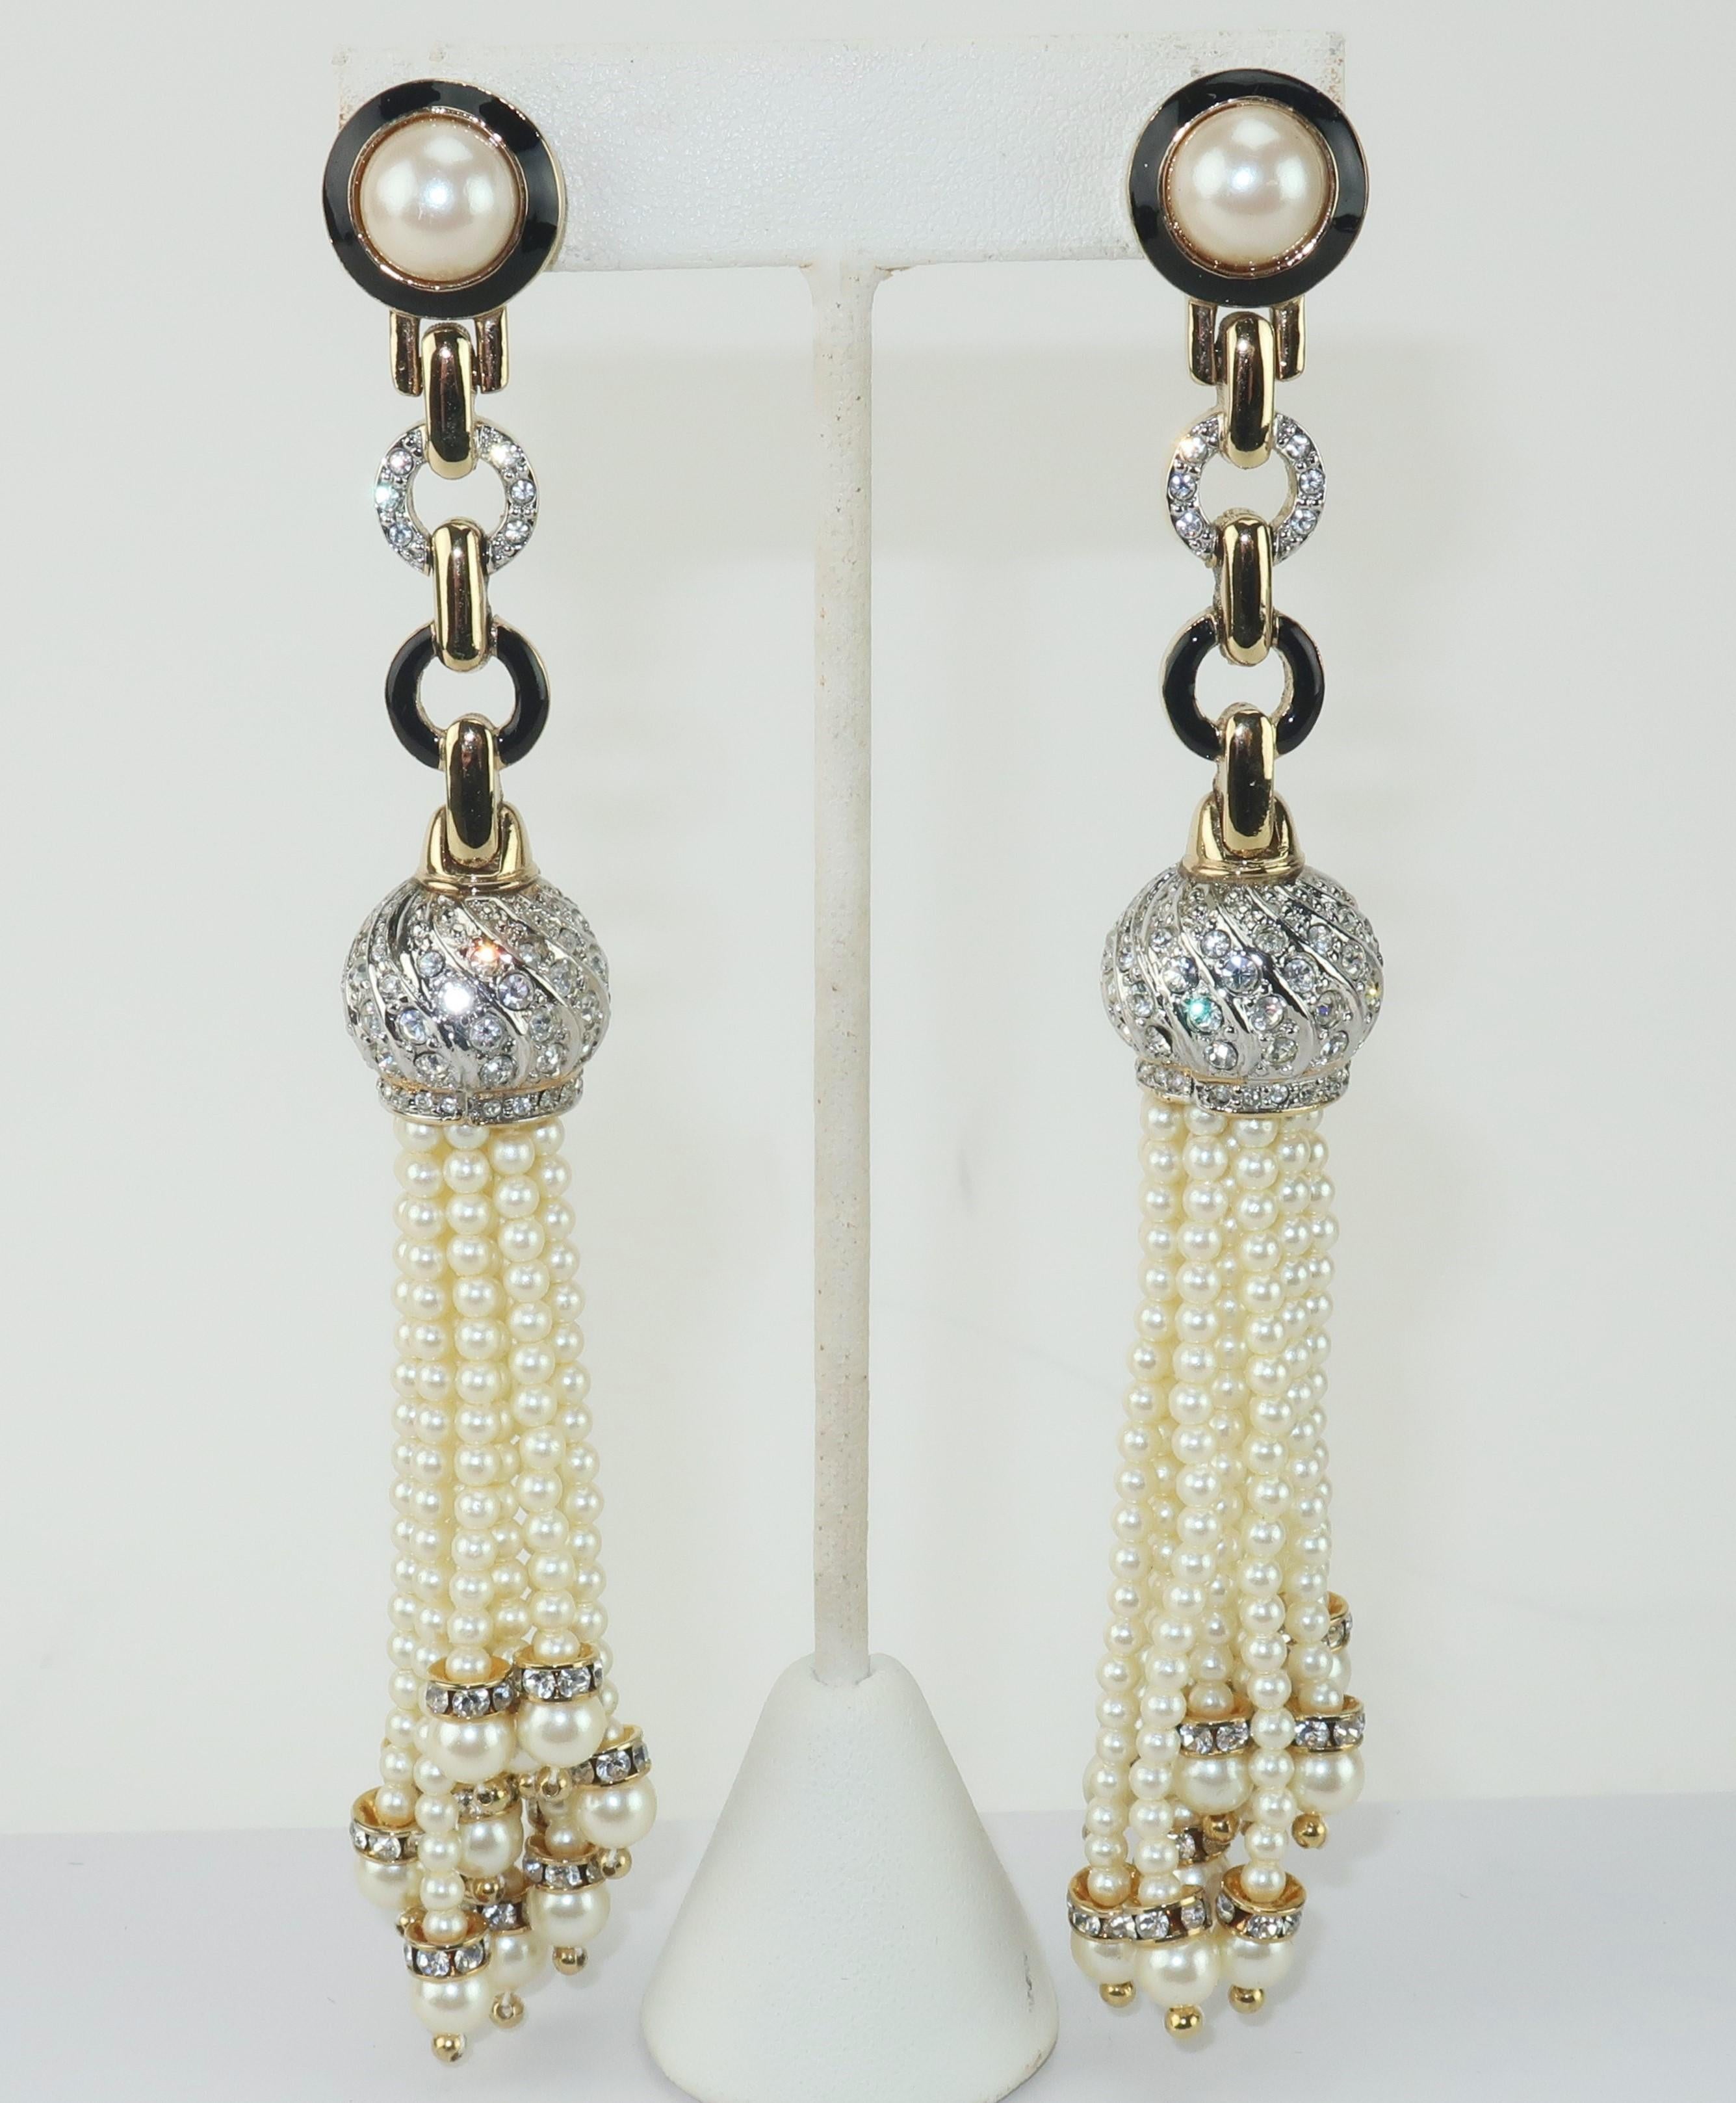 Vintage Carolee faux pearl, rhinestone and black enamel tassel earrings with clip on hardware.  The exaggerated length and articulated movement of the earrings make a striking statement.  Signed to the back of the base.
CONDITION
Very good vintage